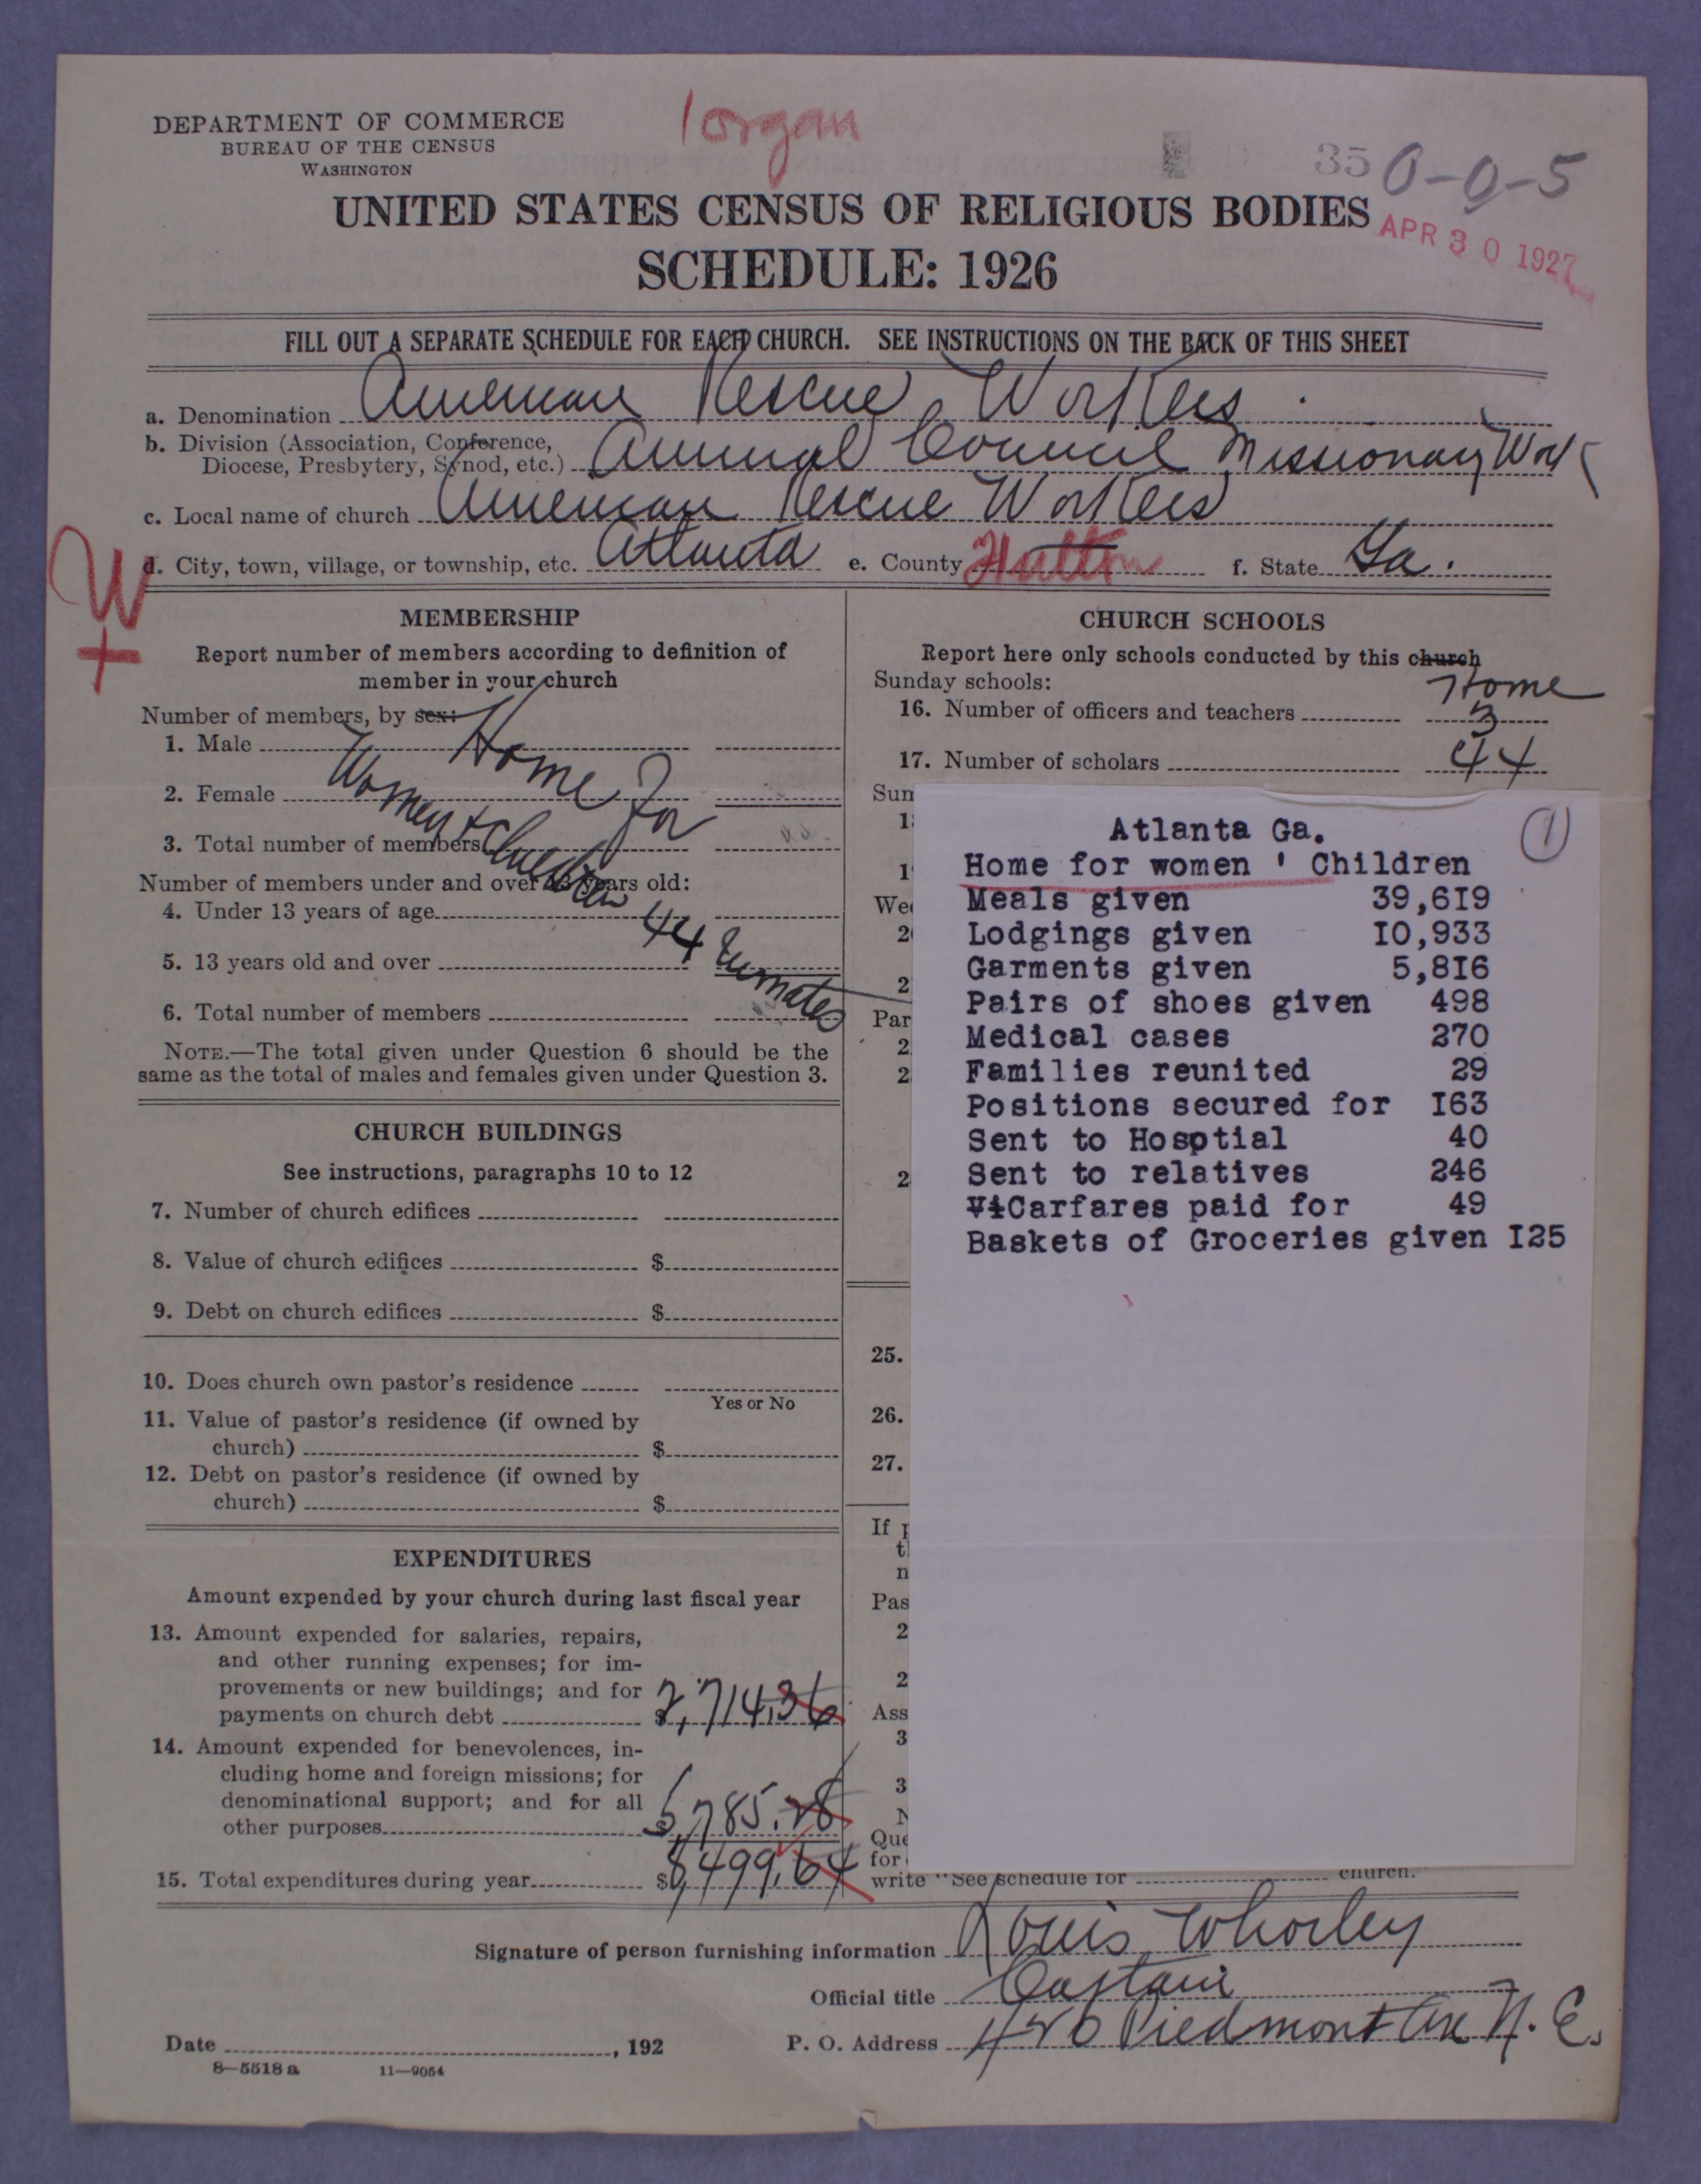 Figure 4. Schedule for the American Rescue Workers in Atlanta, GA. This schedule documents the variety of aid—both tangible and intangible—that was provided at an ARW Home for women and children. In one year, this mission gave 39,619 meals, 10,033 lodgings, 5,816 garments, 498 pairs of shoes, 125 baskets of groceries; paid for 49 car-fares; took care of 270 medical cases; sent 40 people to the hospital; secured 163 jobs; reunited 29 families; and helped 246 people travel to the homes of relatives.